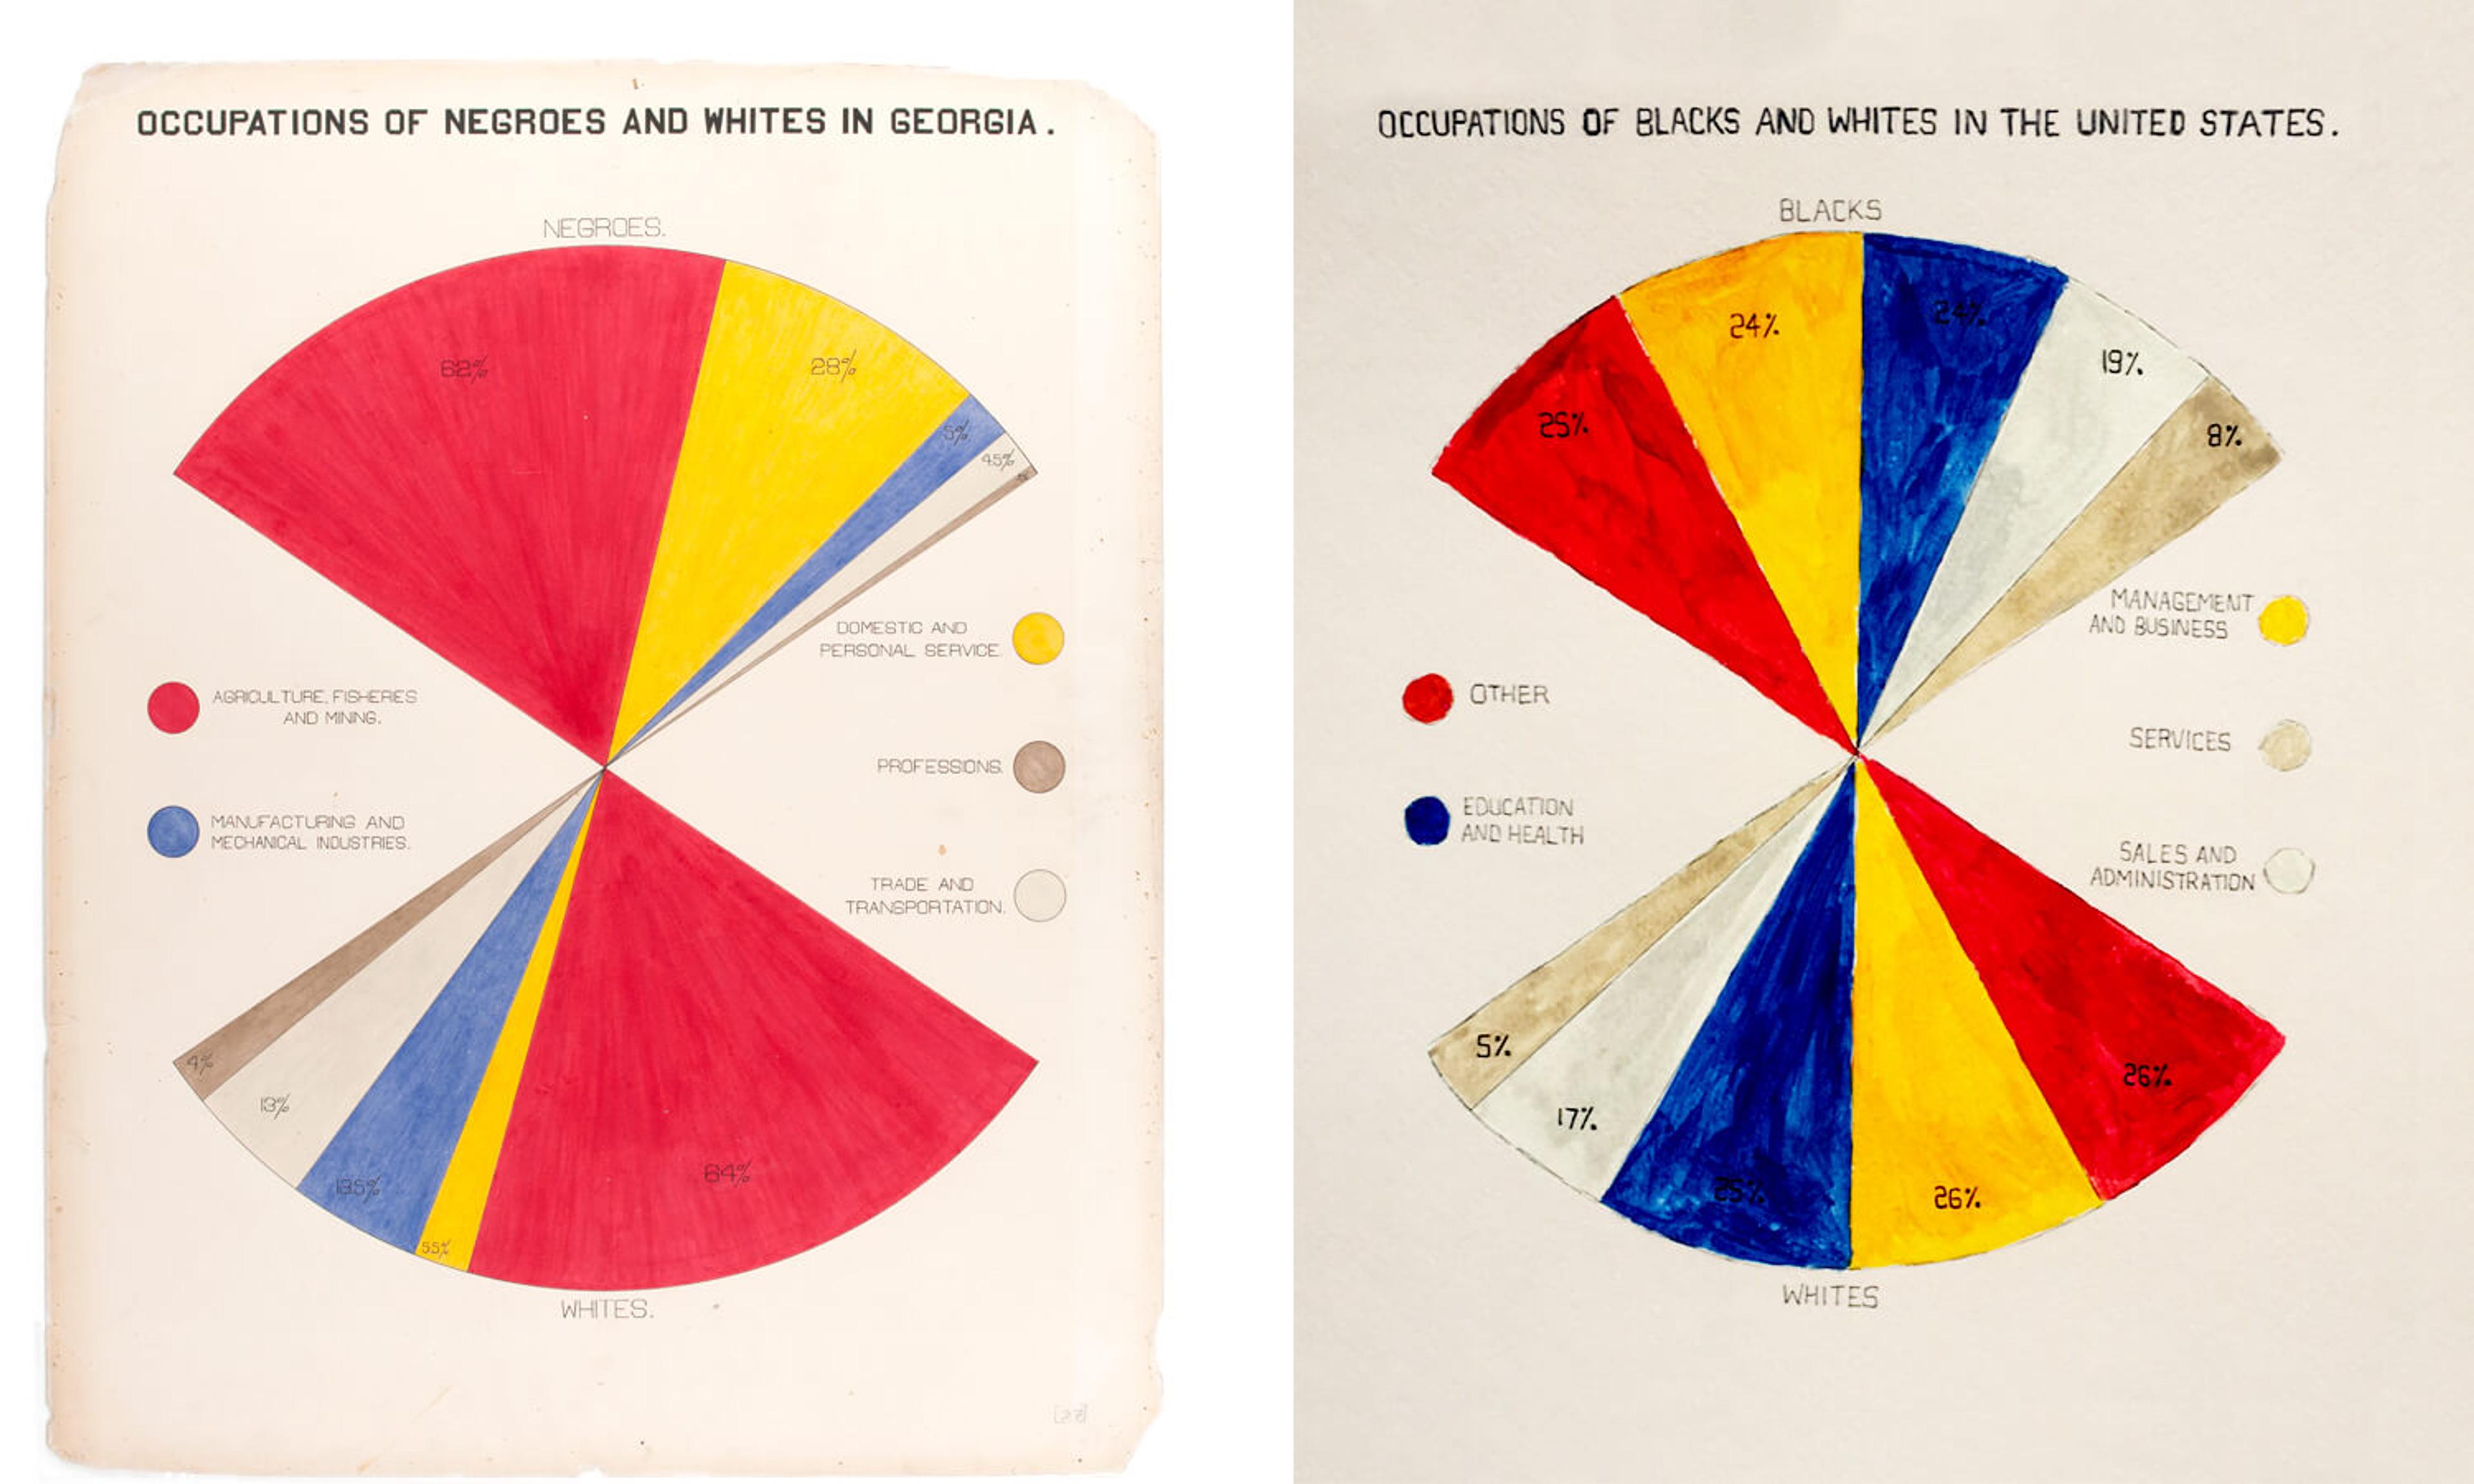 Two pie charts placed side by side. The former is titled "Occupations of Negroes and Whites in Georgia" while the latter is titled "Occupations of Blacks and Whites in the United States".